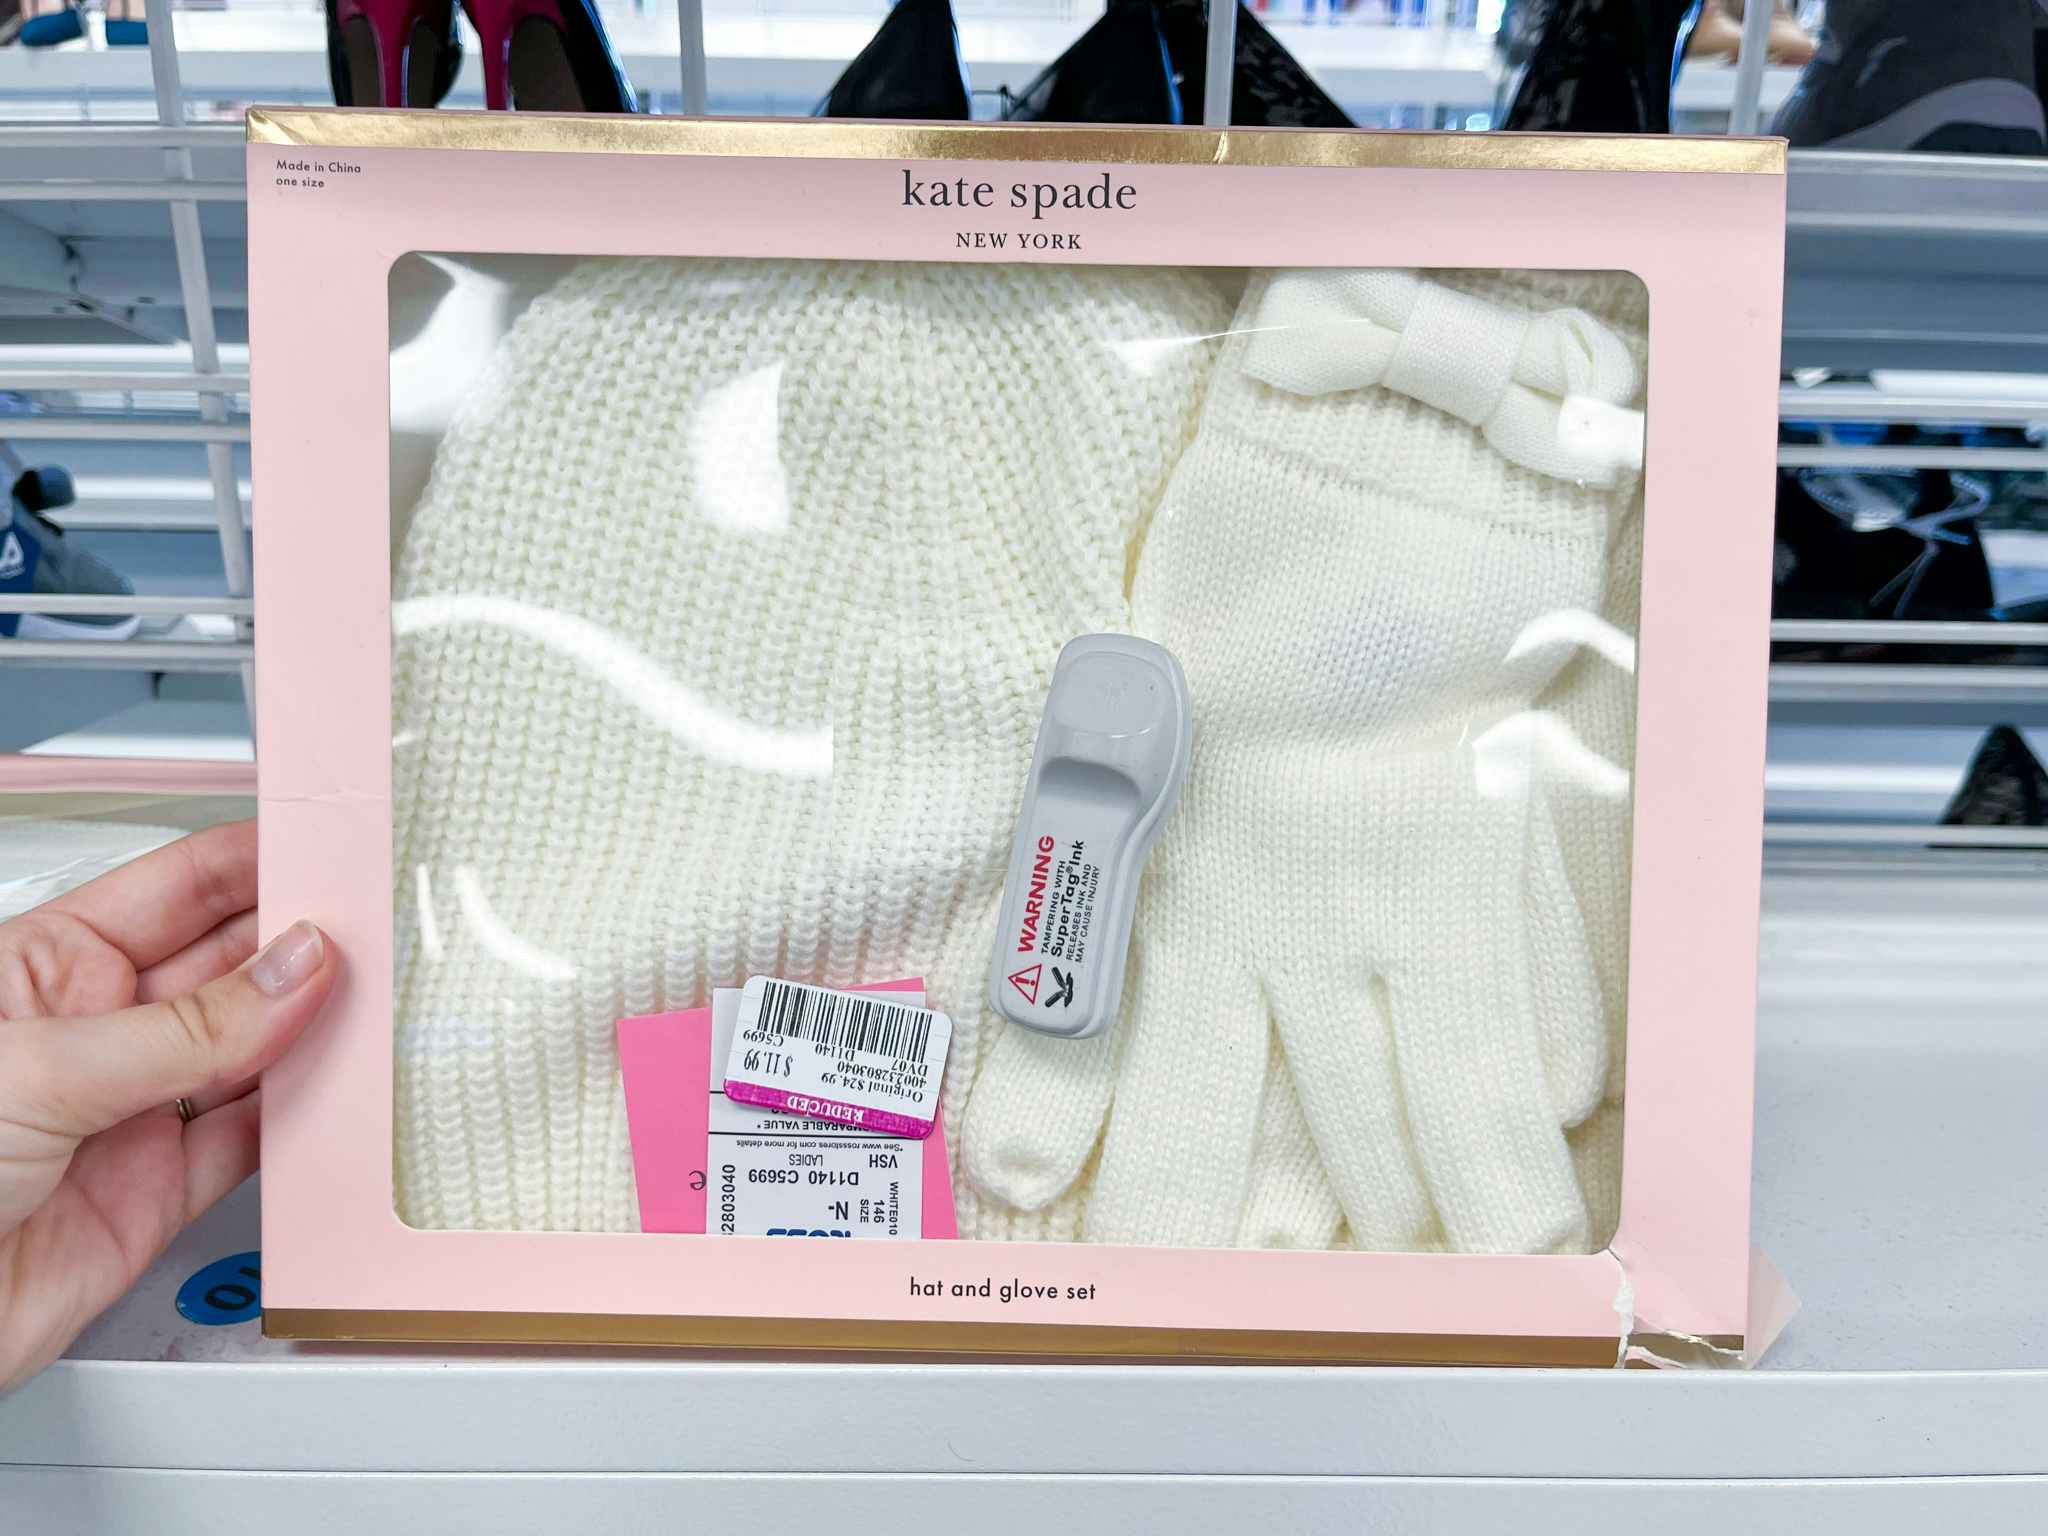 a kate spade hat and glove set on sale for $11.99 during the Ross clearance event